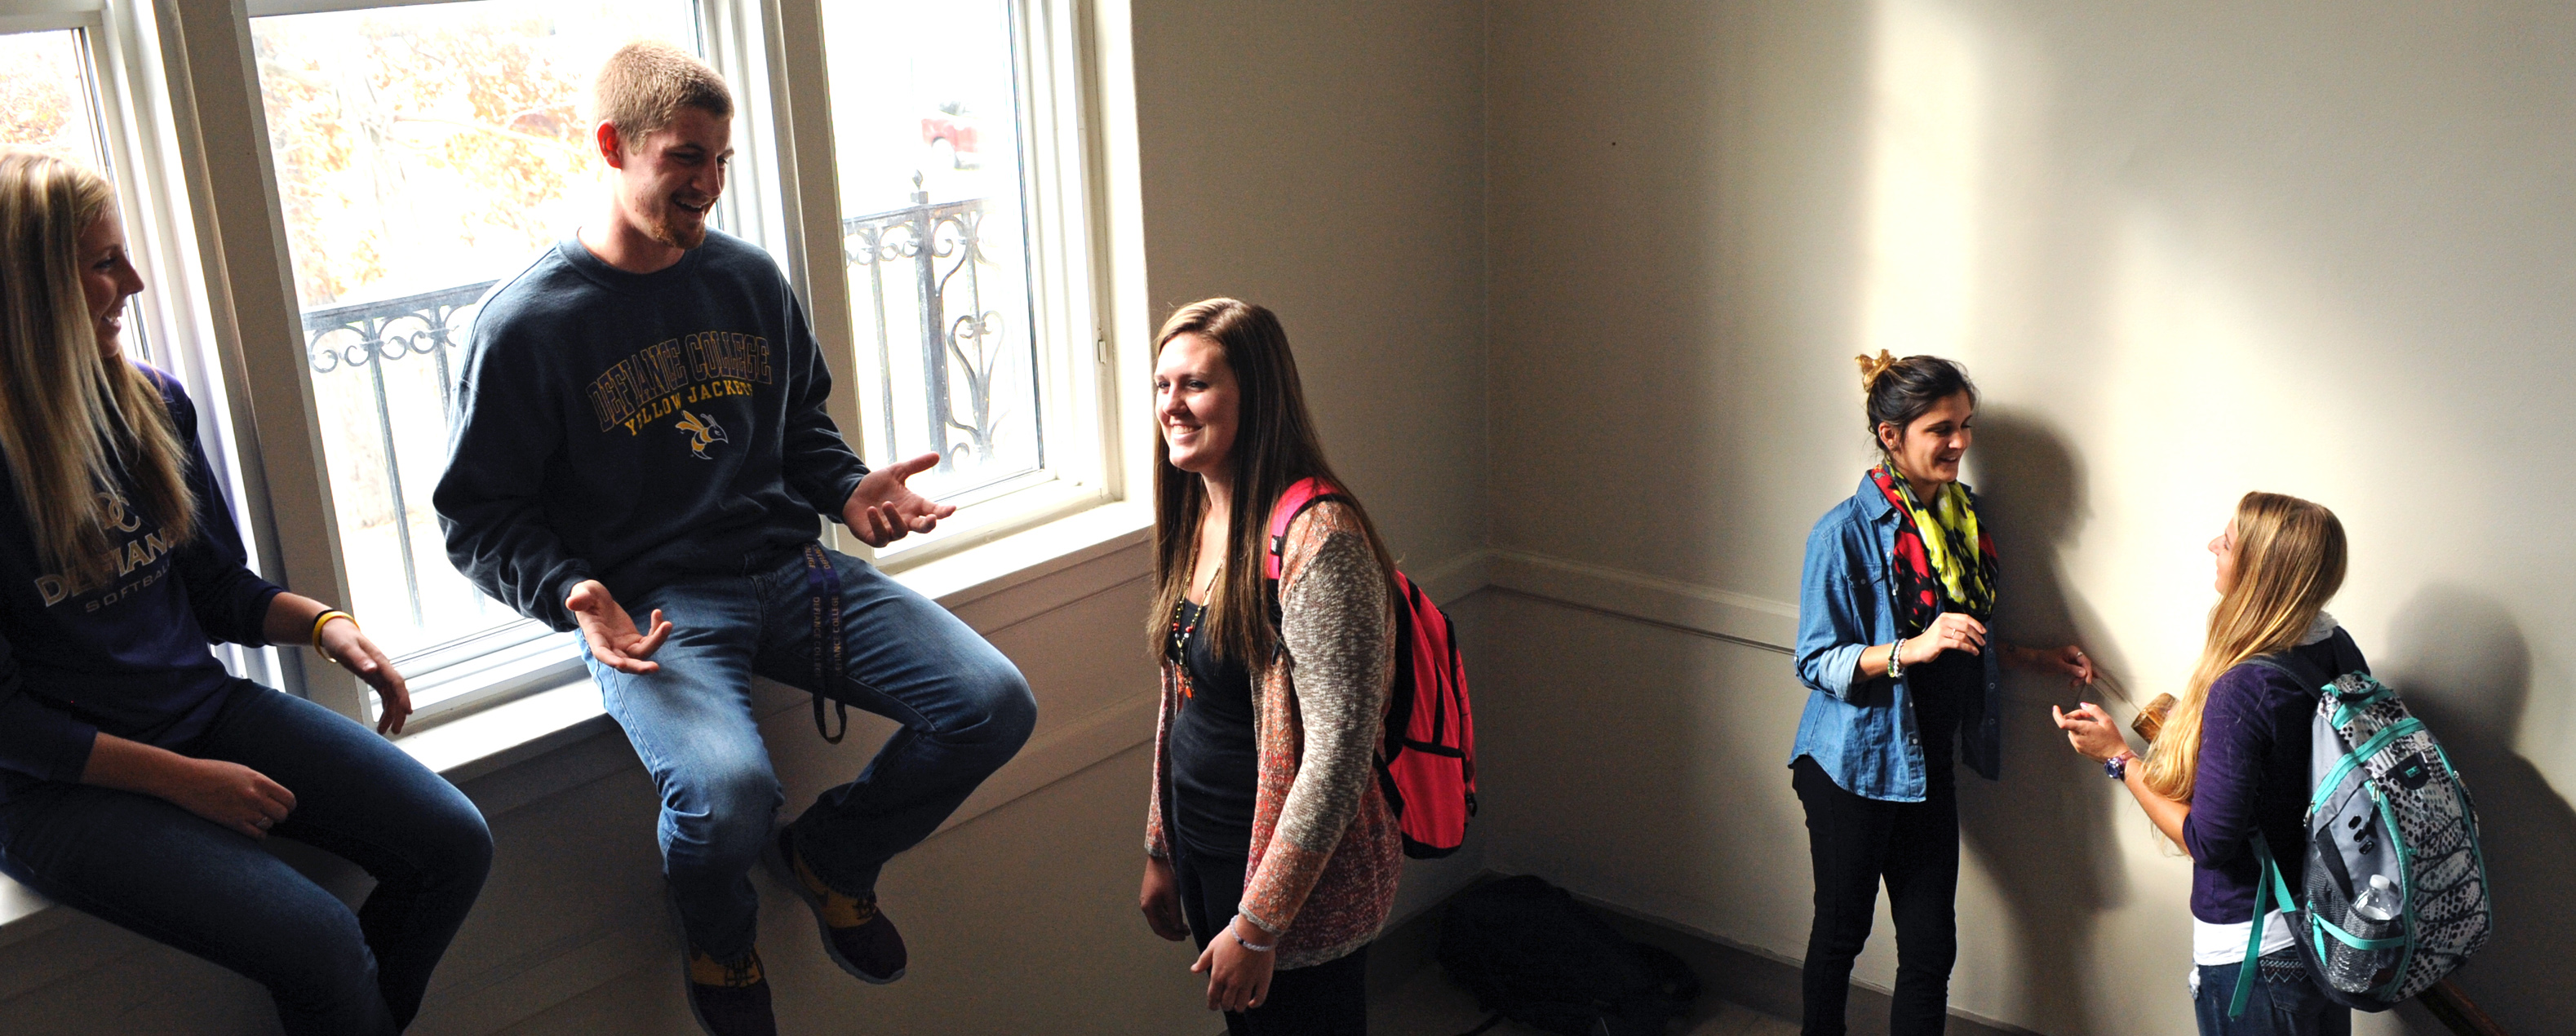 Five students gathered and speaking together in a large stairwell. Light from the big window in the background highlights the room.